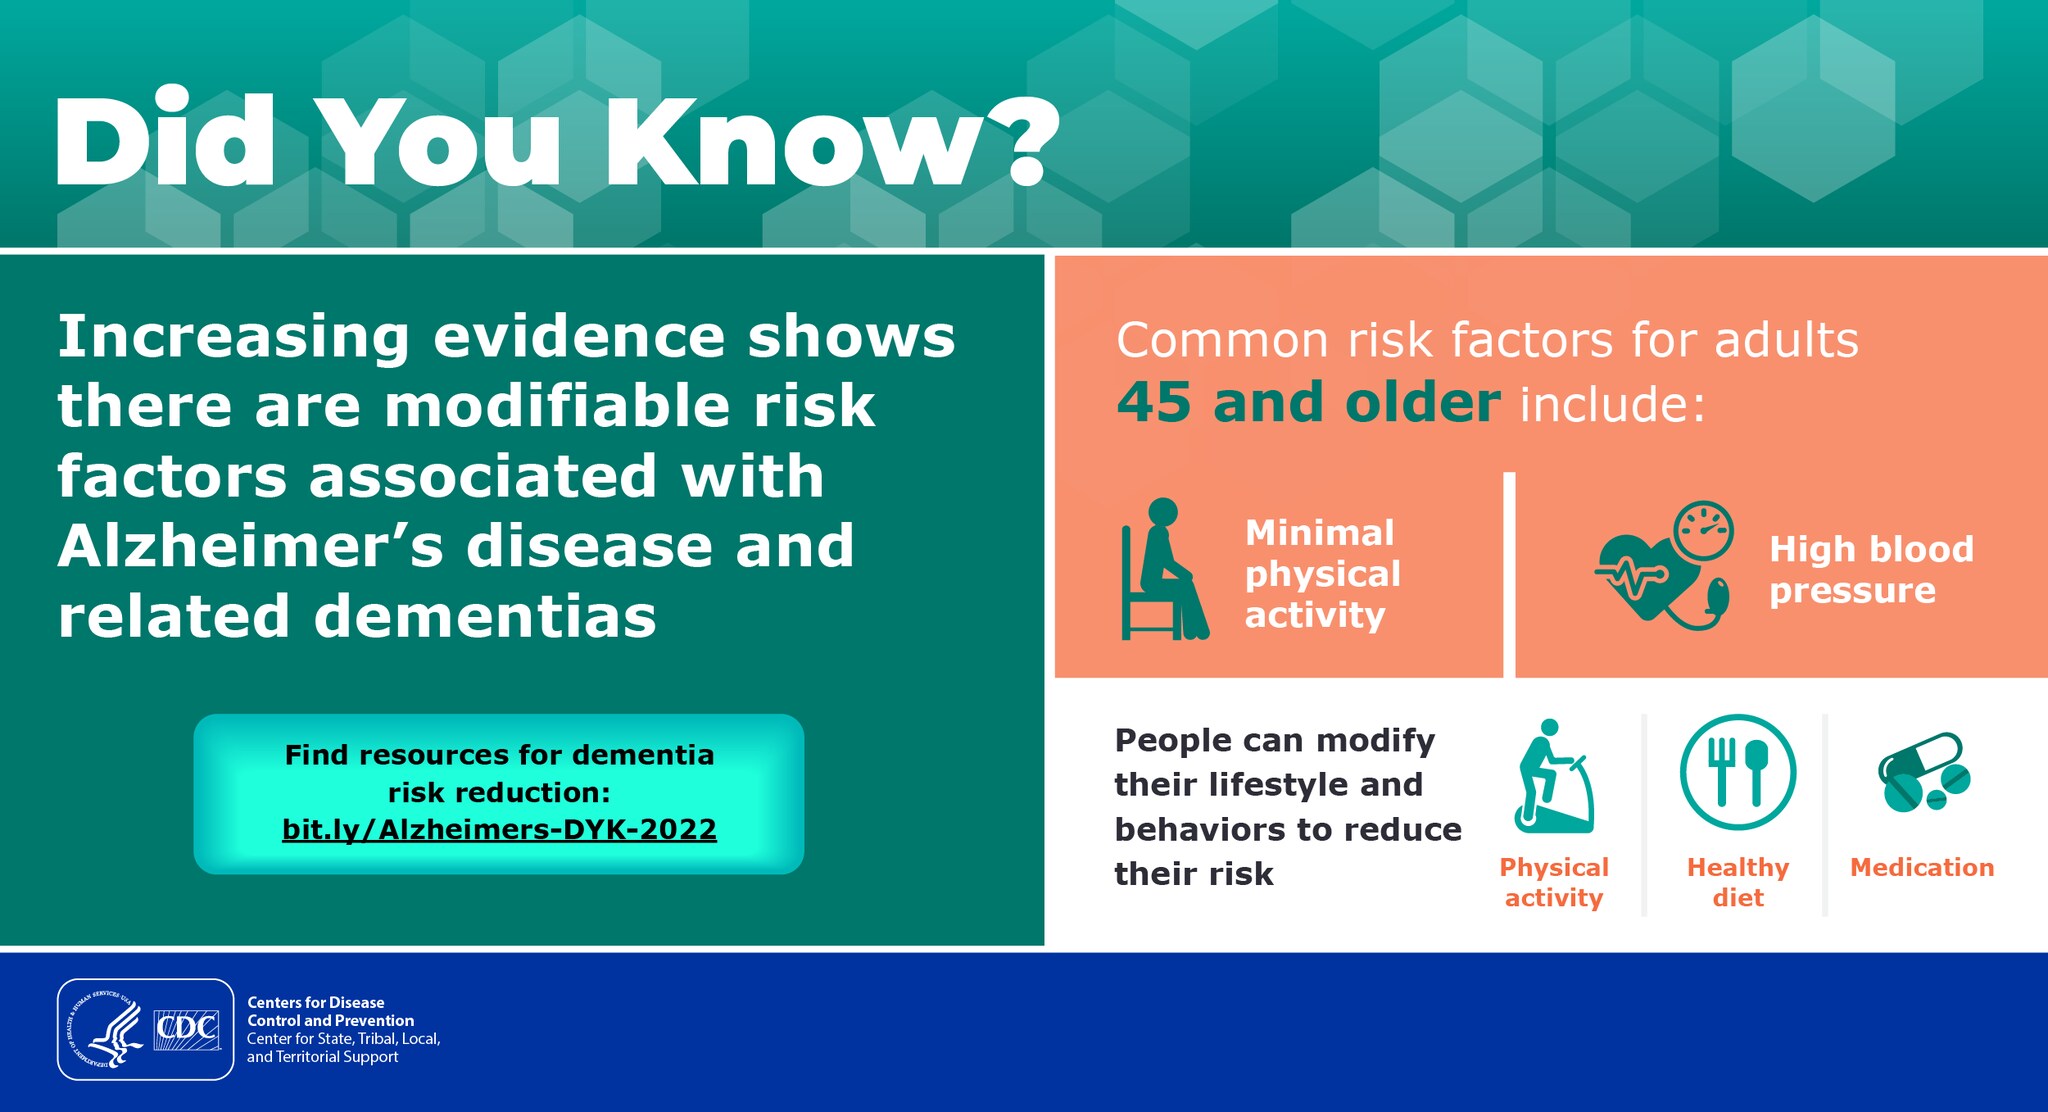 An infographic titled Did You Know? Text says: Increasing evidence shows there are modifiable risk factors associated with Alzheimer’s disease and related dementias. Common risk factors for adults 45 and older include minimal physical activity and high blood pressure. Learn how people can modify their lifestyle and behaviors to reduce their risk at bit.ly/Alzheimers-DYK-2022.